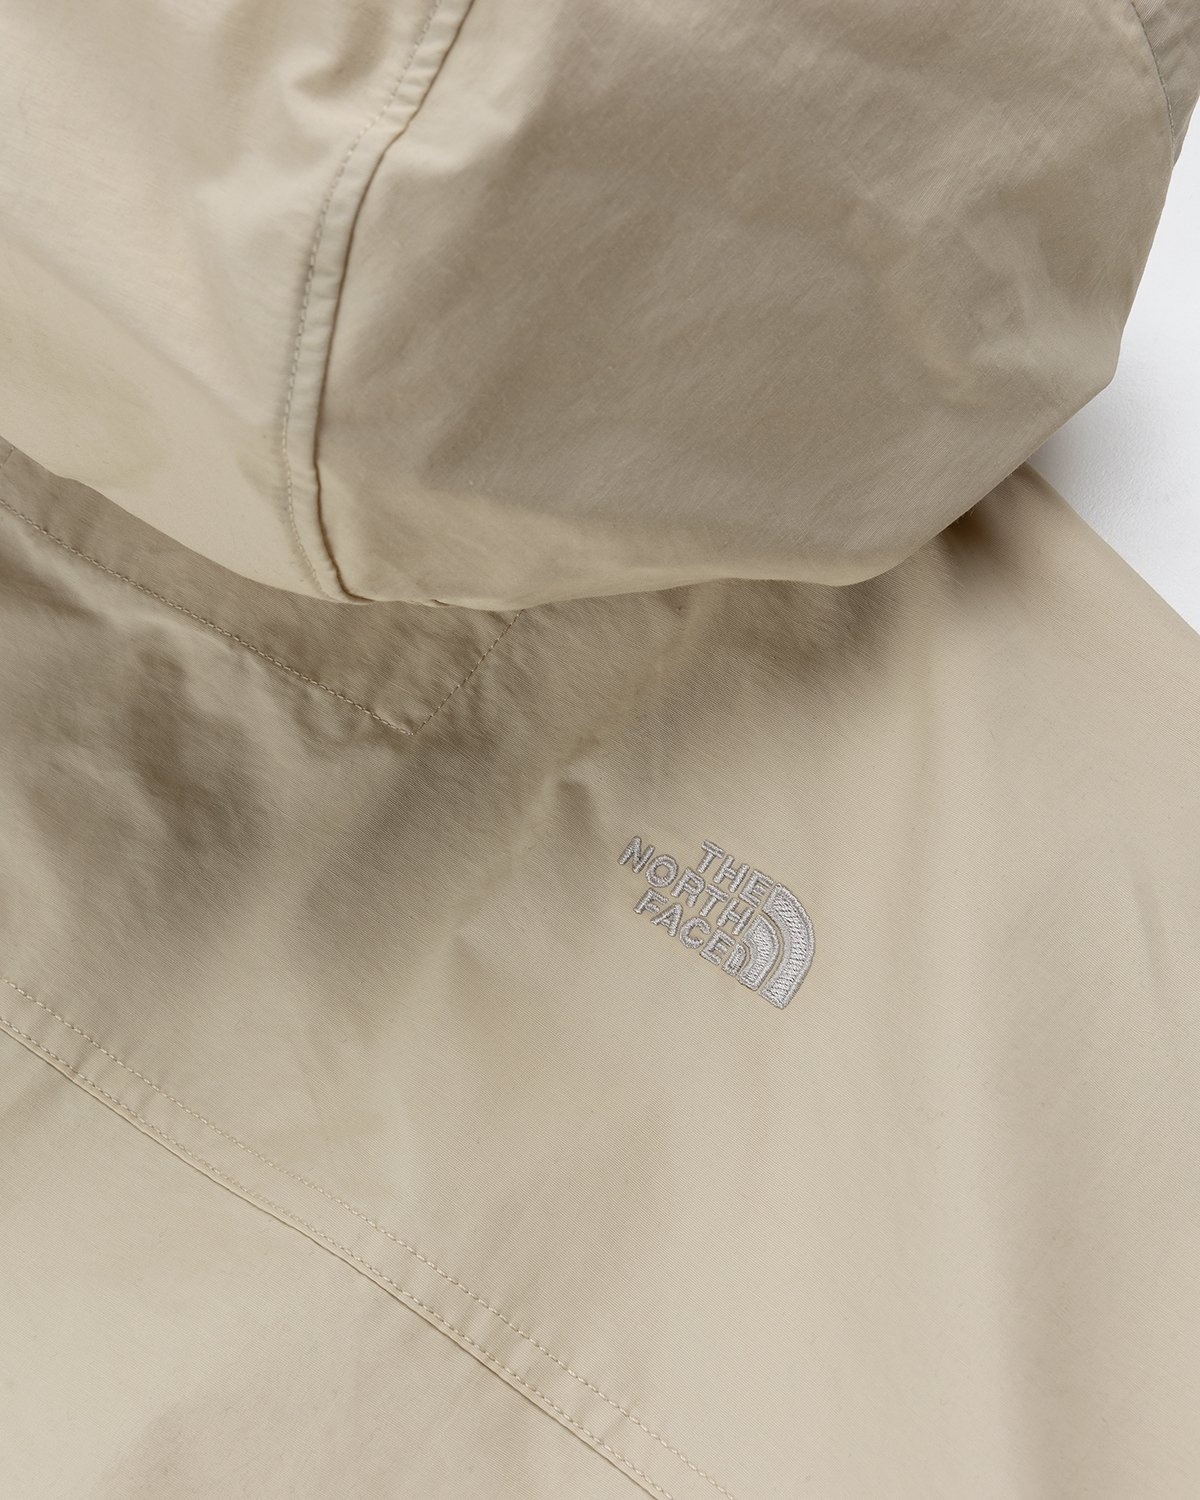 The North Face – Sky Valley Windbreaker Jacket Gravel - Outerwear - Beige - Image 3